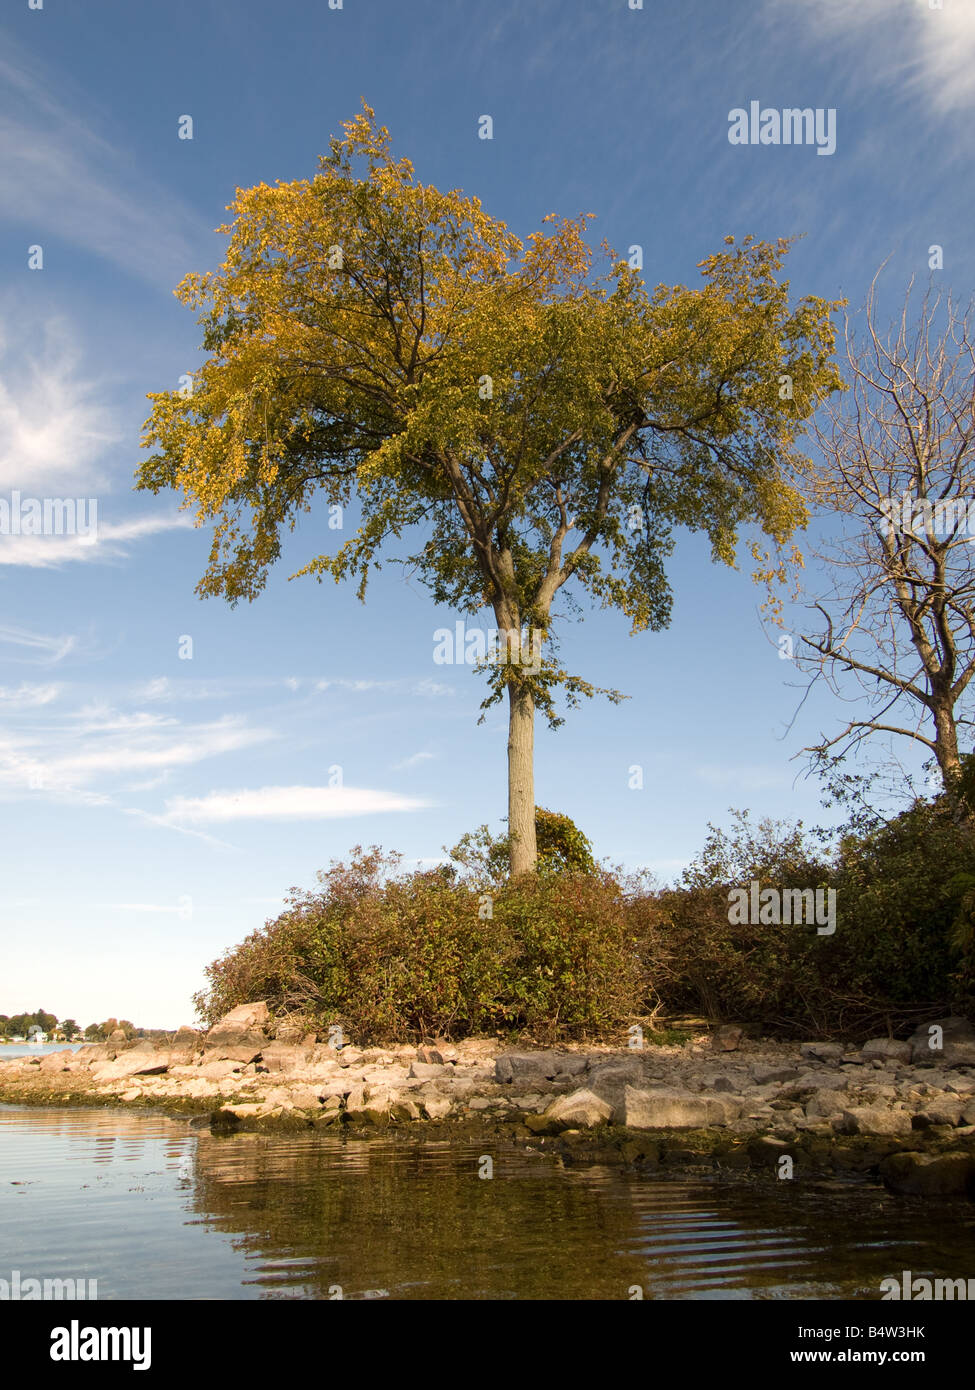 A beautiful American Elm (Ulmus americana) tree, about 60 years old growing on the point of an island. Stock Photo